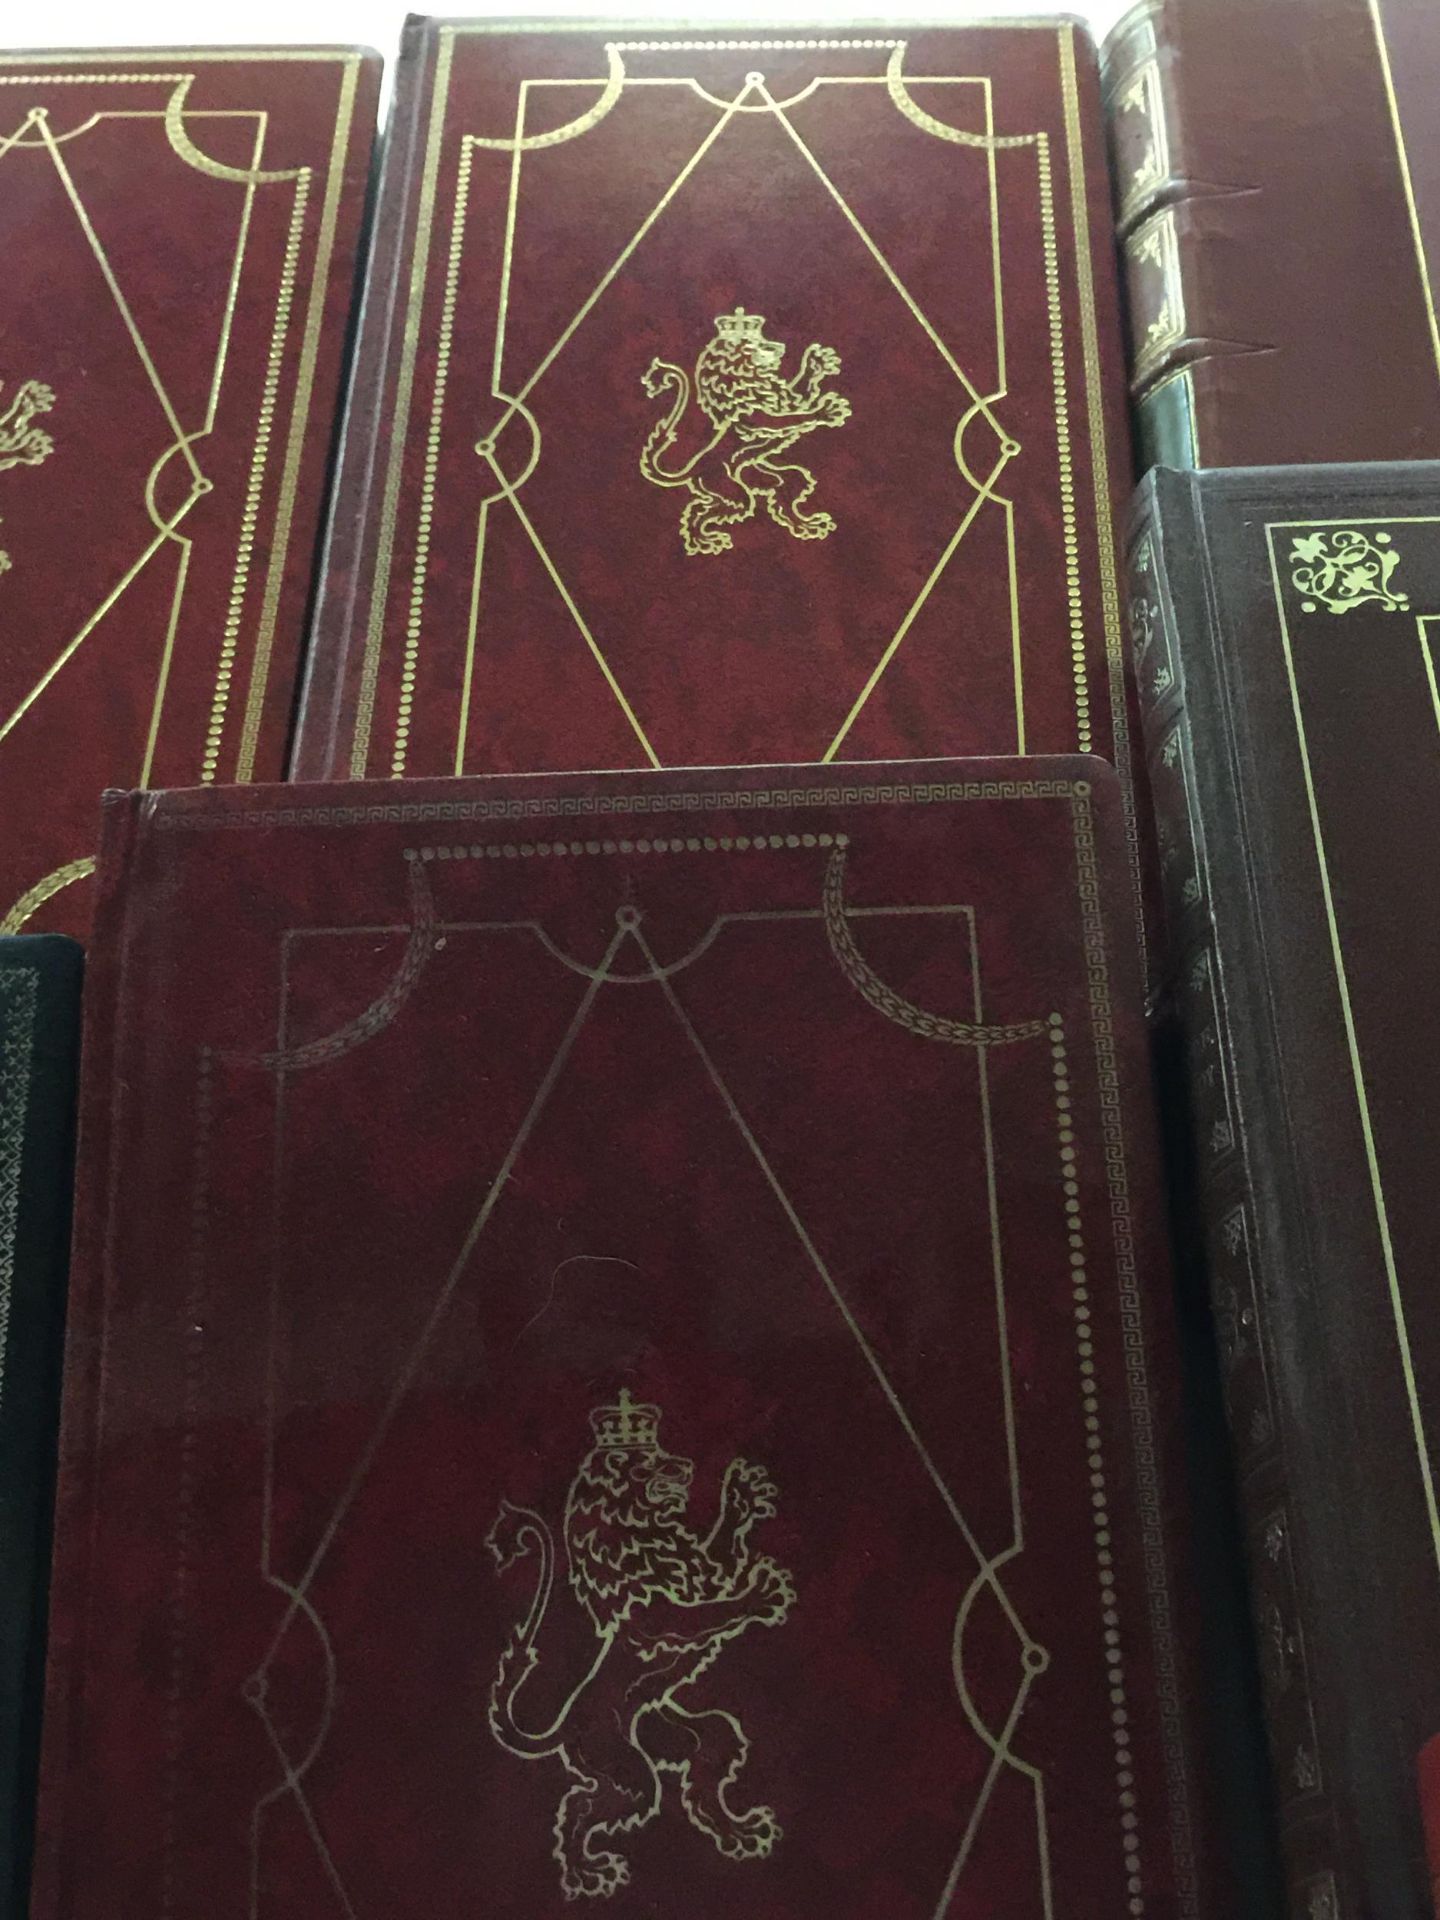 A COLLECTION OF GILT TOOLED BOOKS, DON QUIXOTE, SIR WALTER SCOTT NOVELS ETC - Image 6 of 6